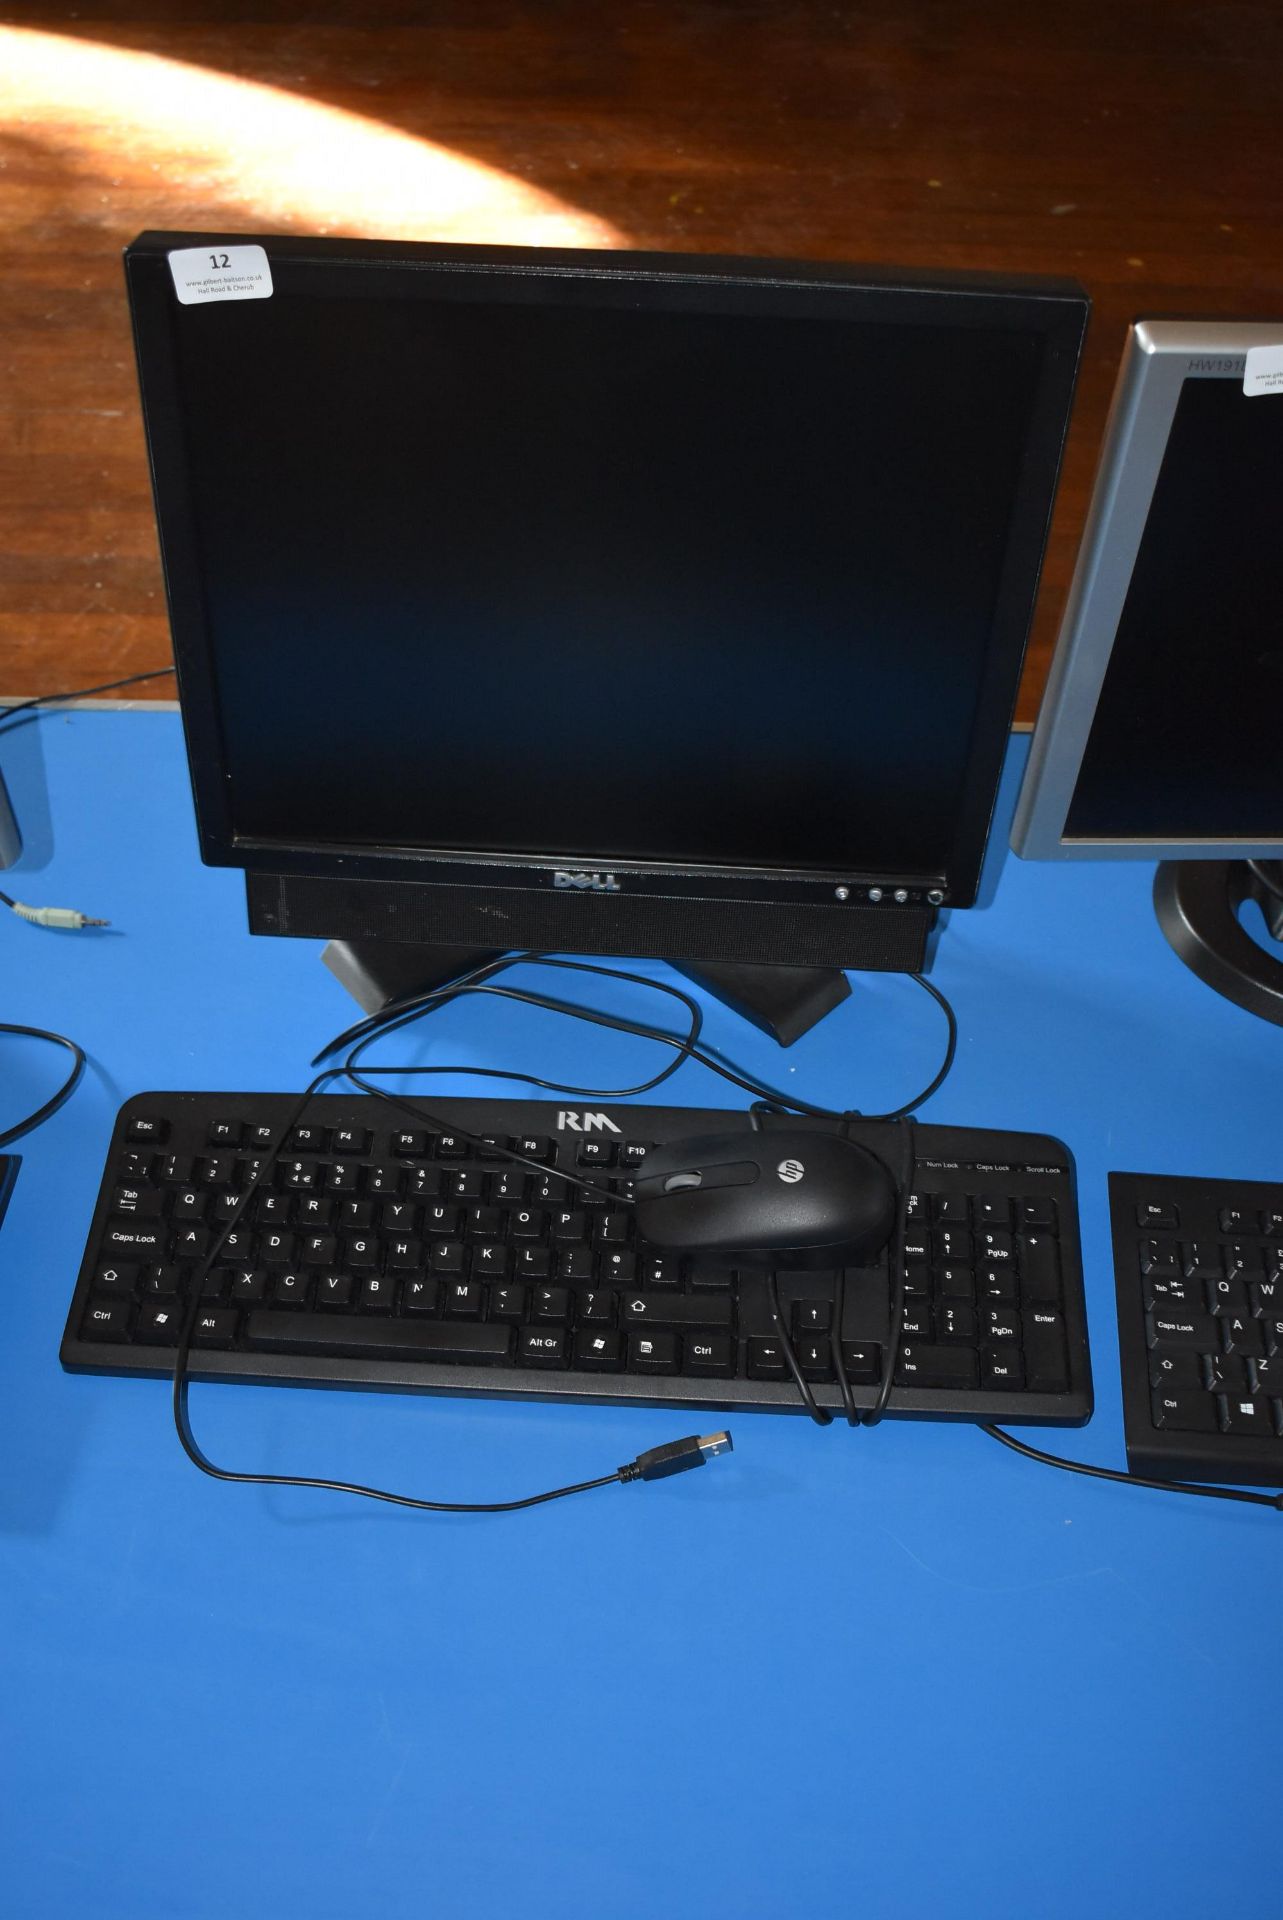 *Dell Monitor with RM Keyboard and Mouse